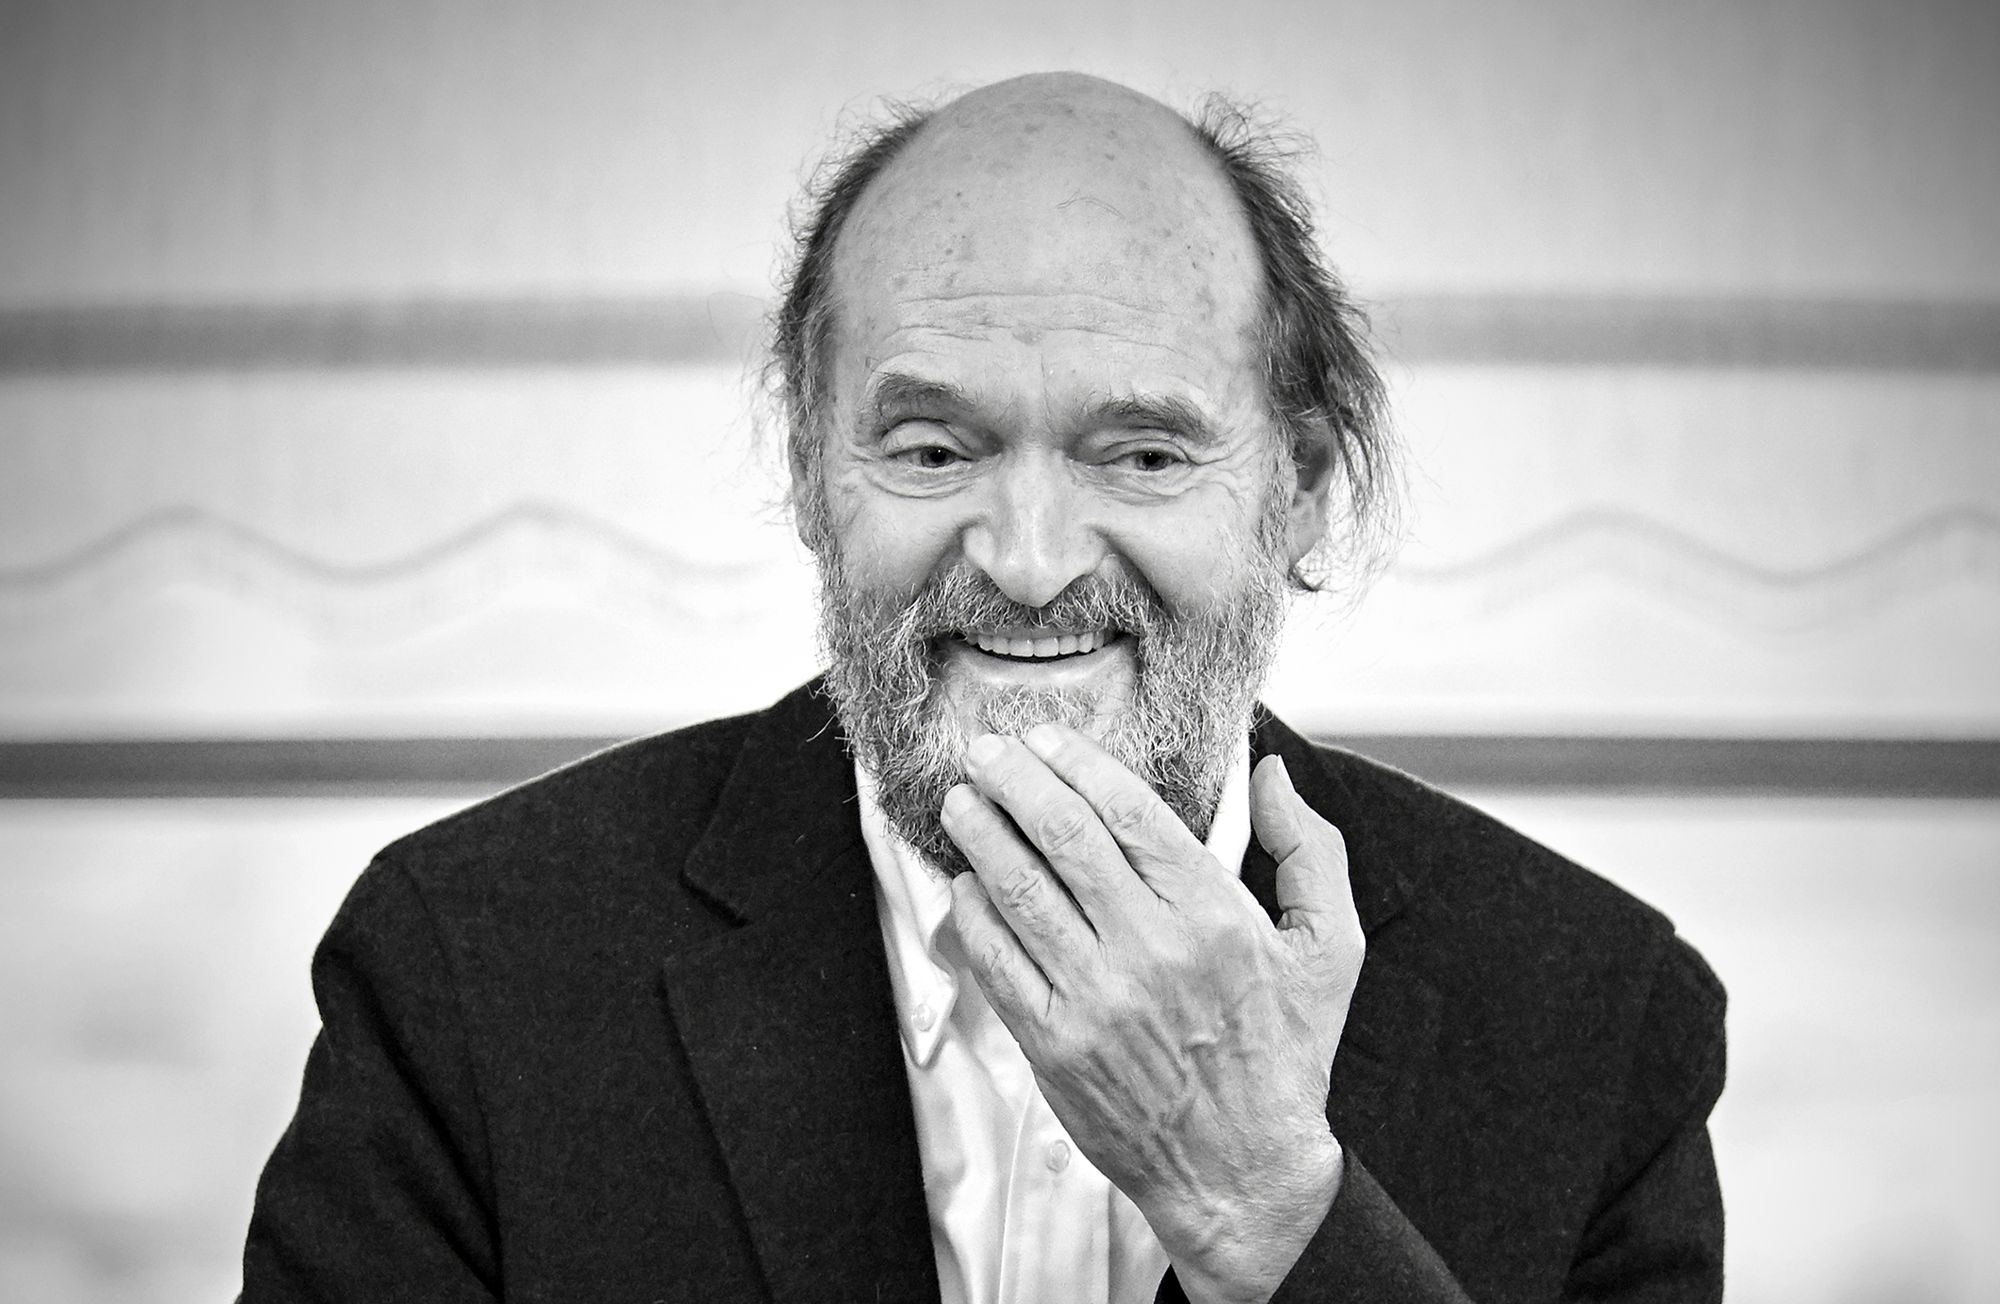 Arvo Pärt is the world’s most performed living composer